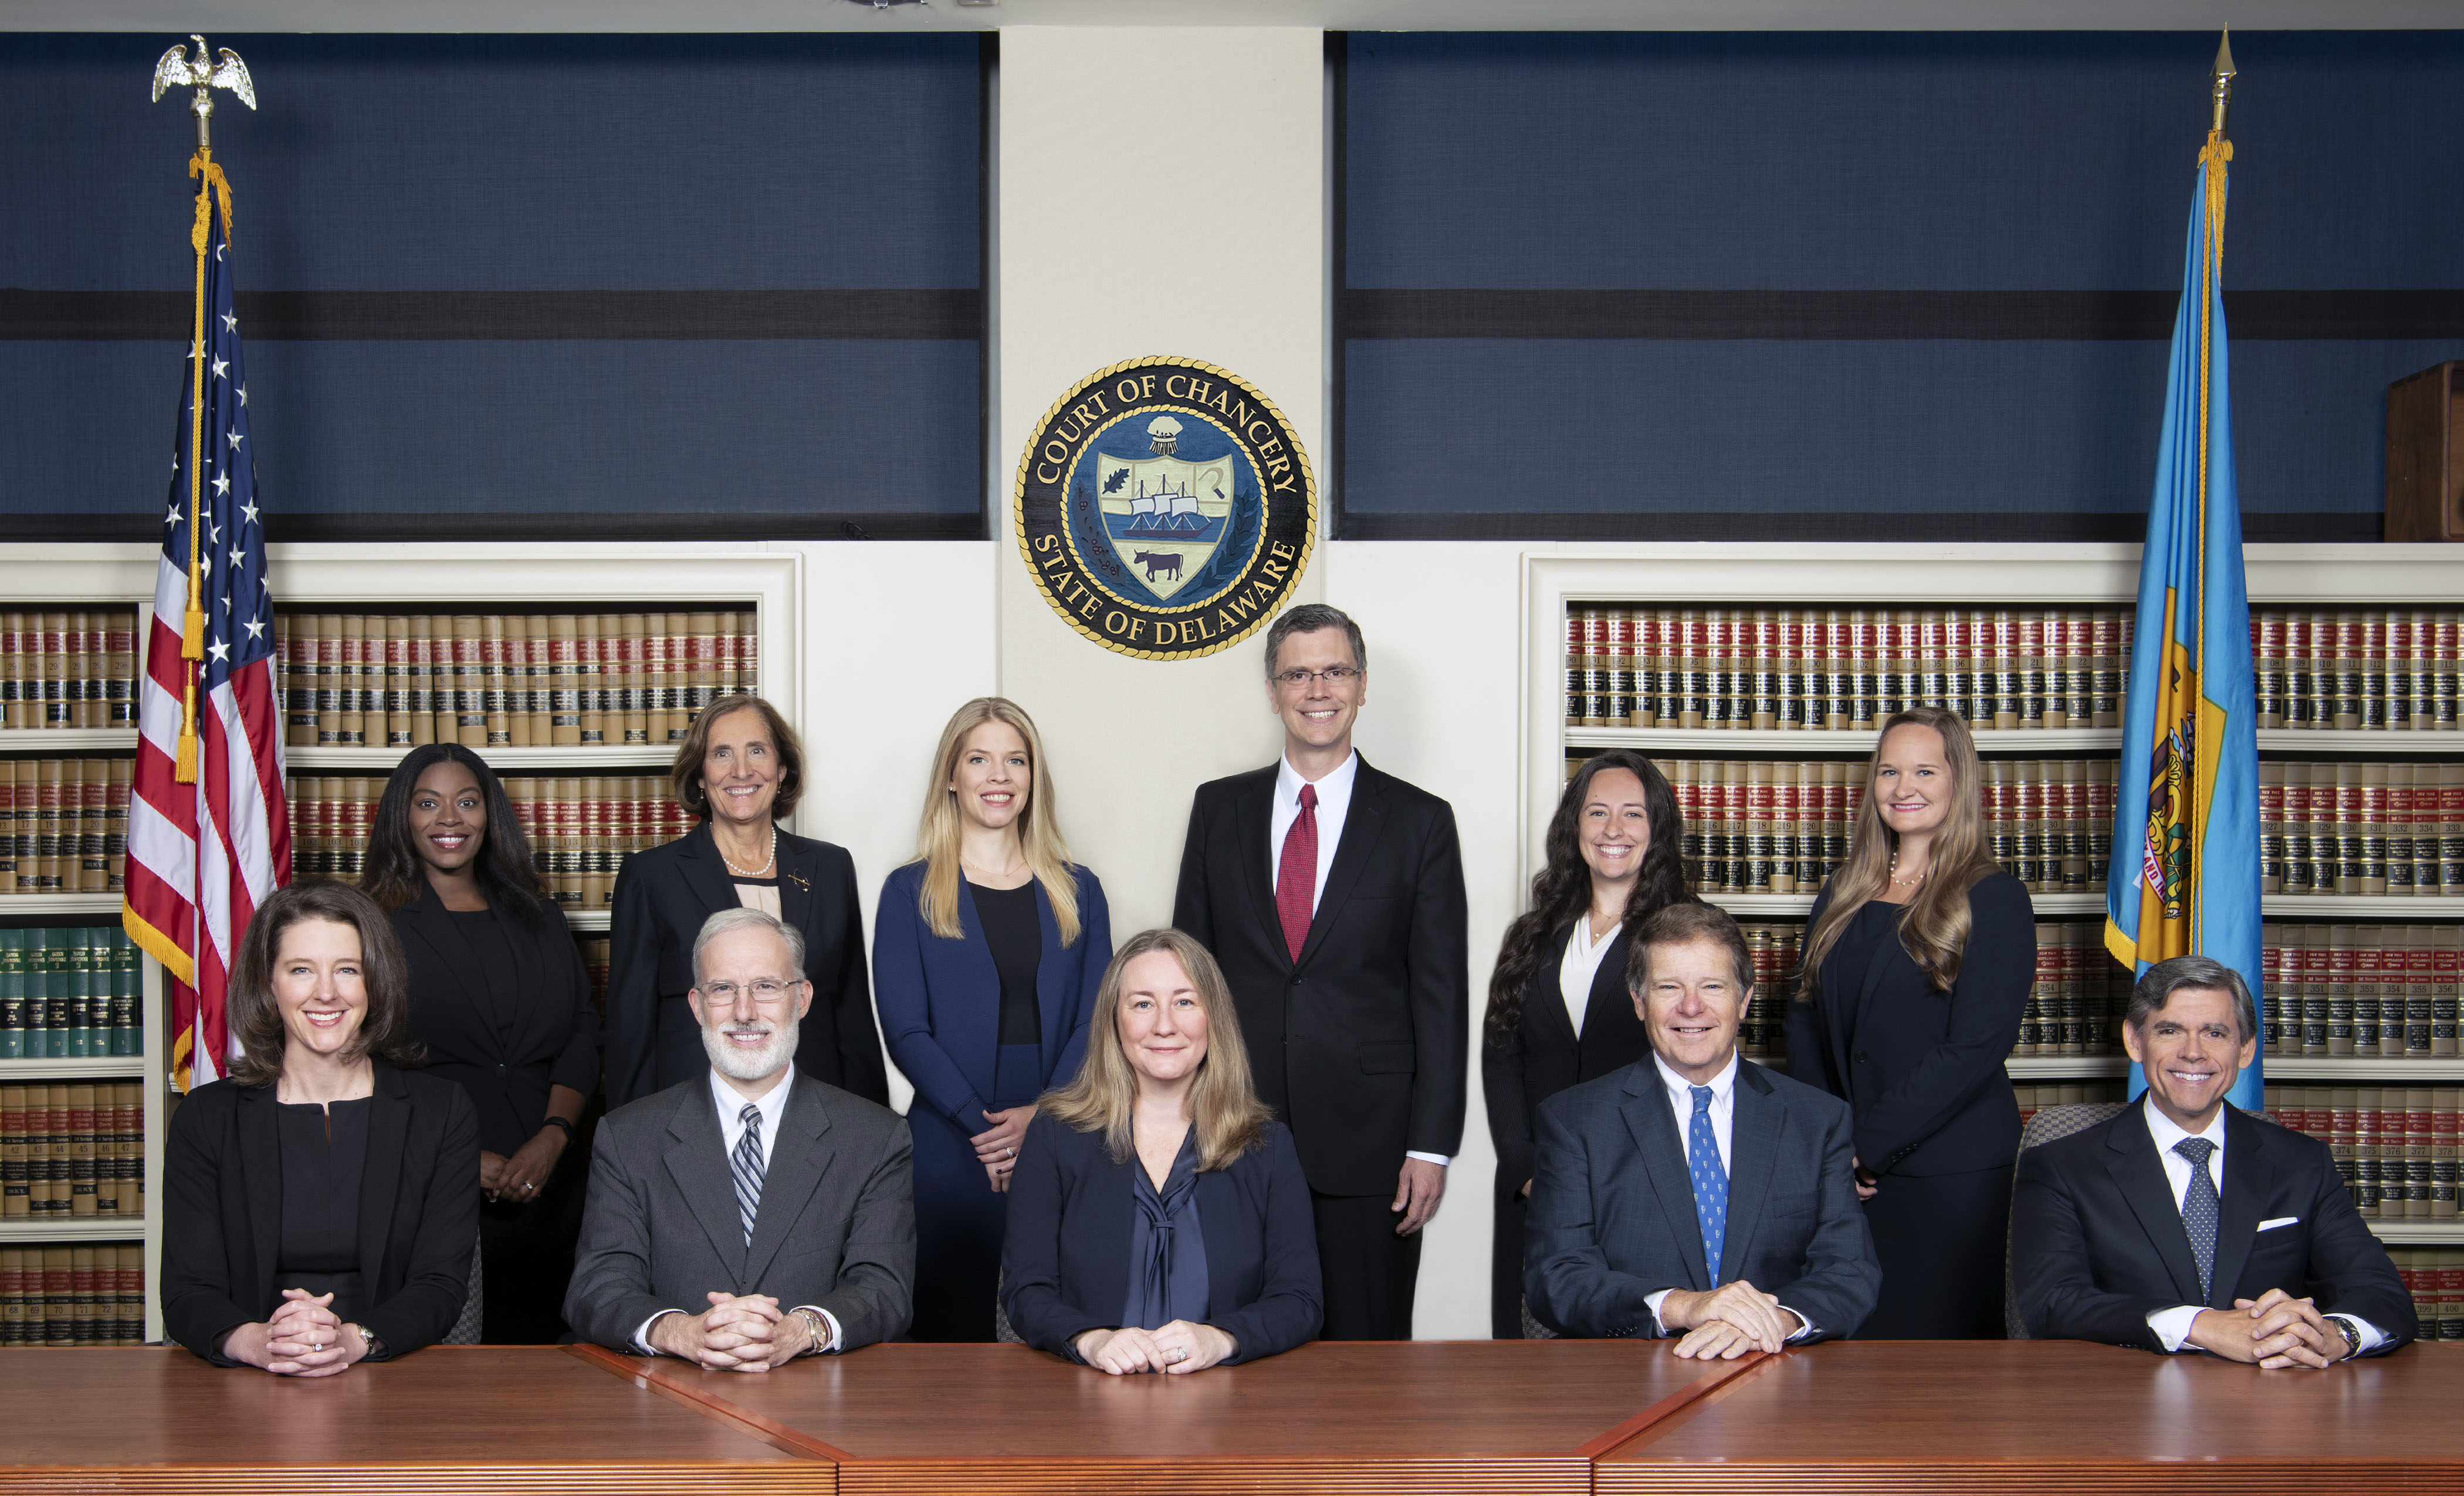 Picture of the Court of Chancery Judicial Officers